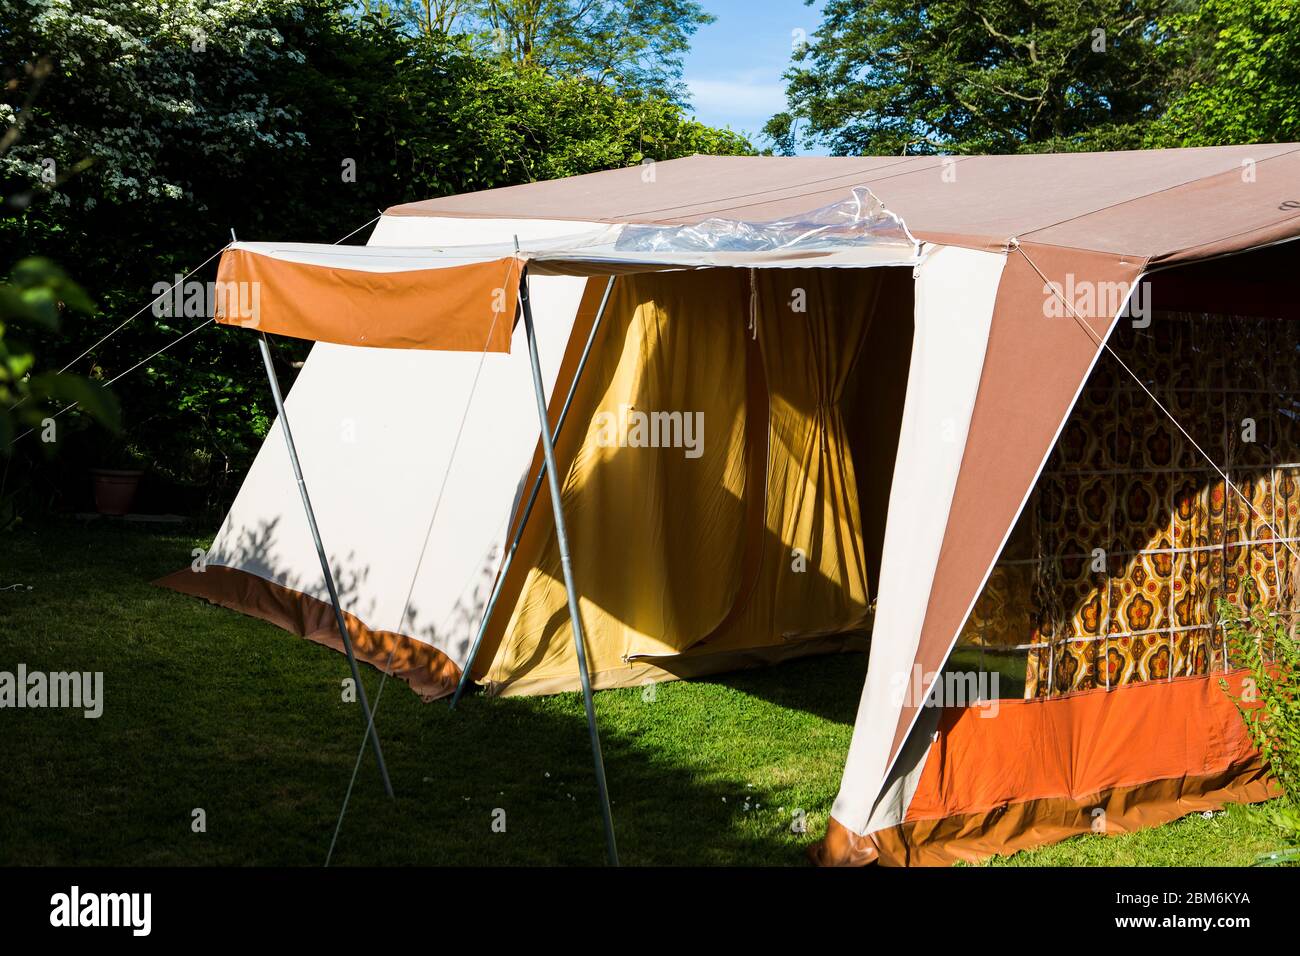 Original French 70's Raclet frame tent, 6 berth family camping with classic retro style for family camping and summer holidays, Kent, UK Stock Photo